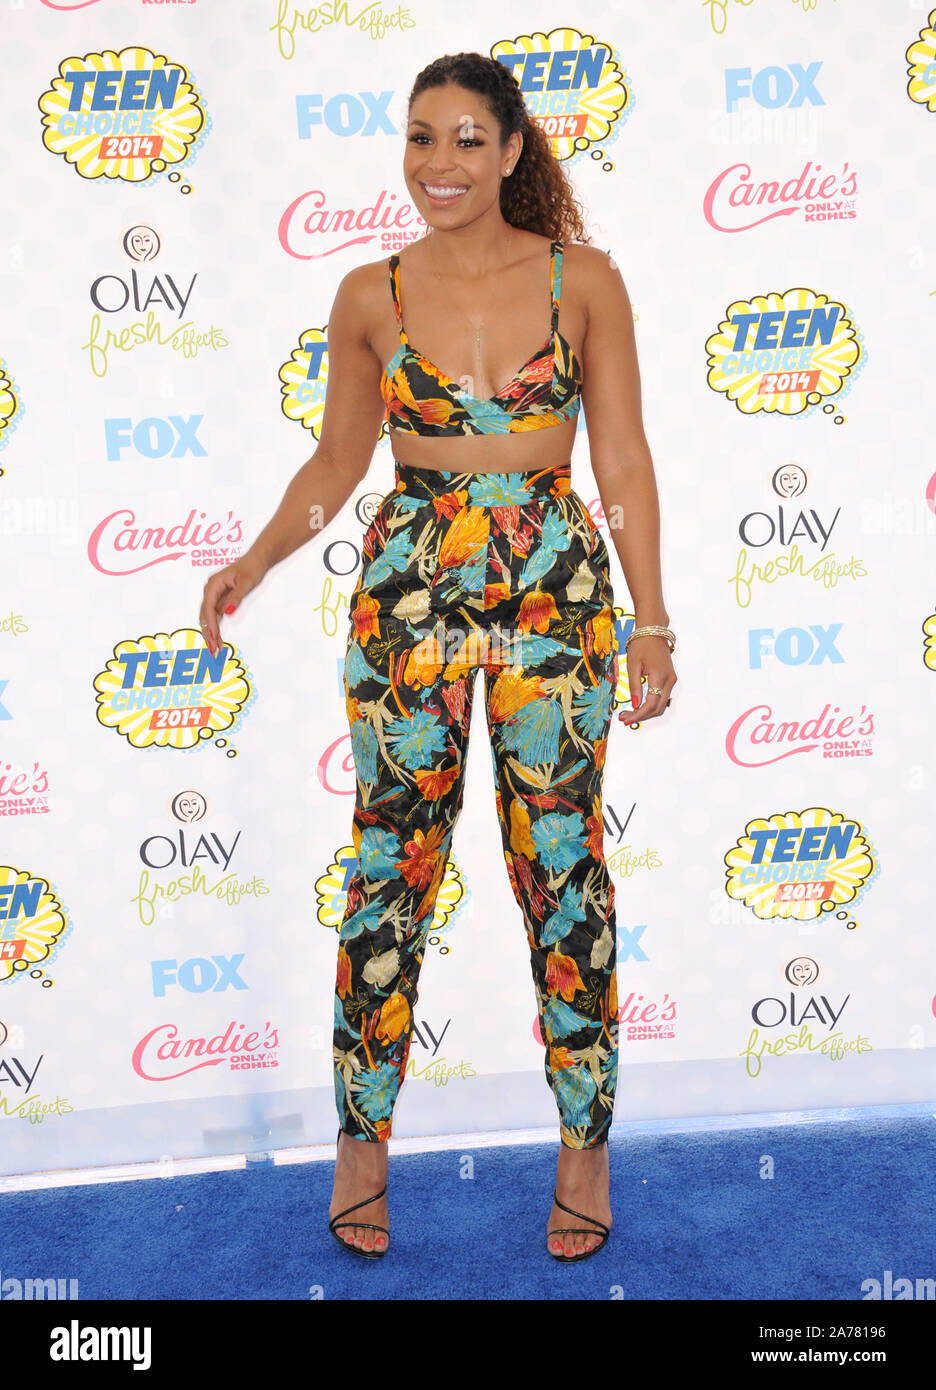 LOS ANGELES, CA - AUGUST 10, 2014: Jordin Sparks at the 2014 Teen Choice Awards at the Shrine Auditorium.© 2014 Paul Smith / Featureflash Stock Photo